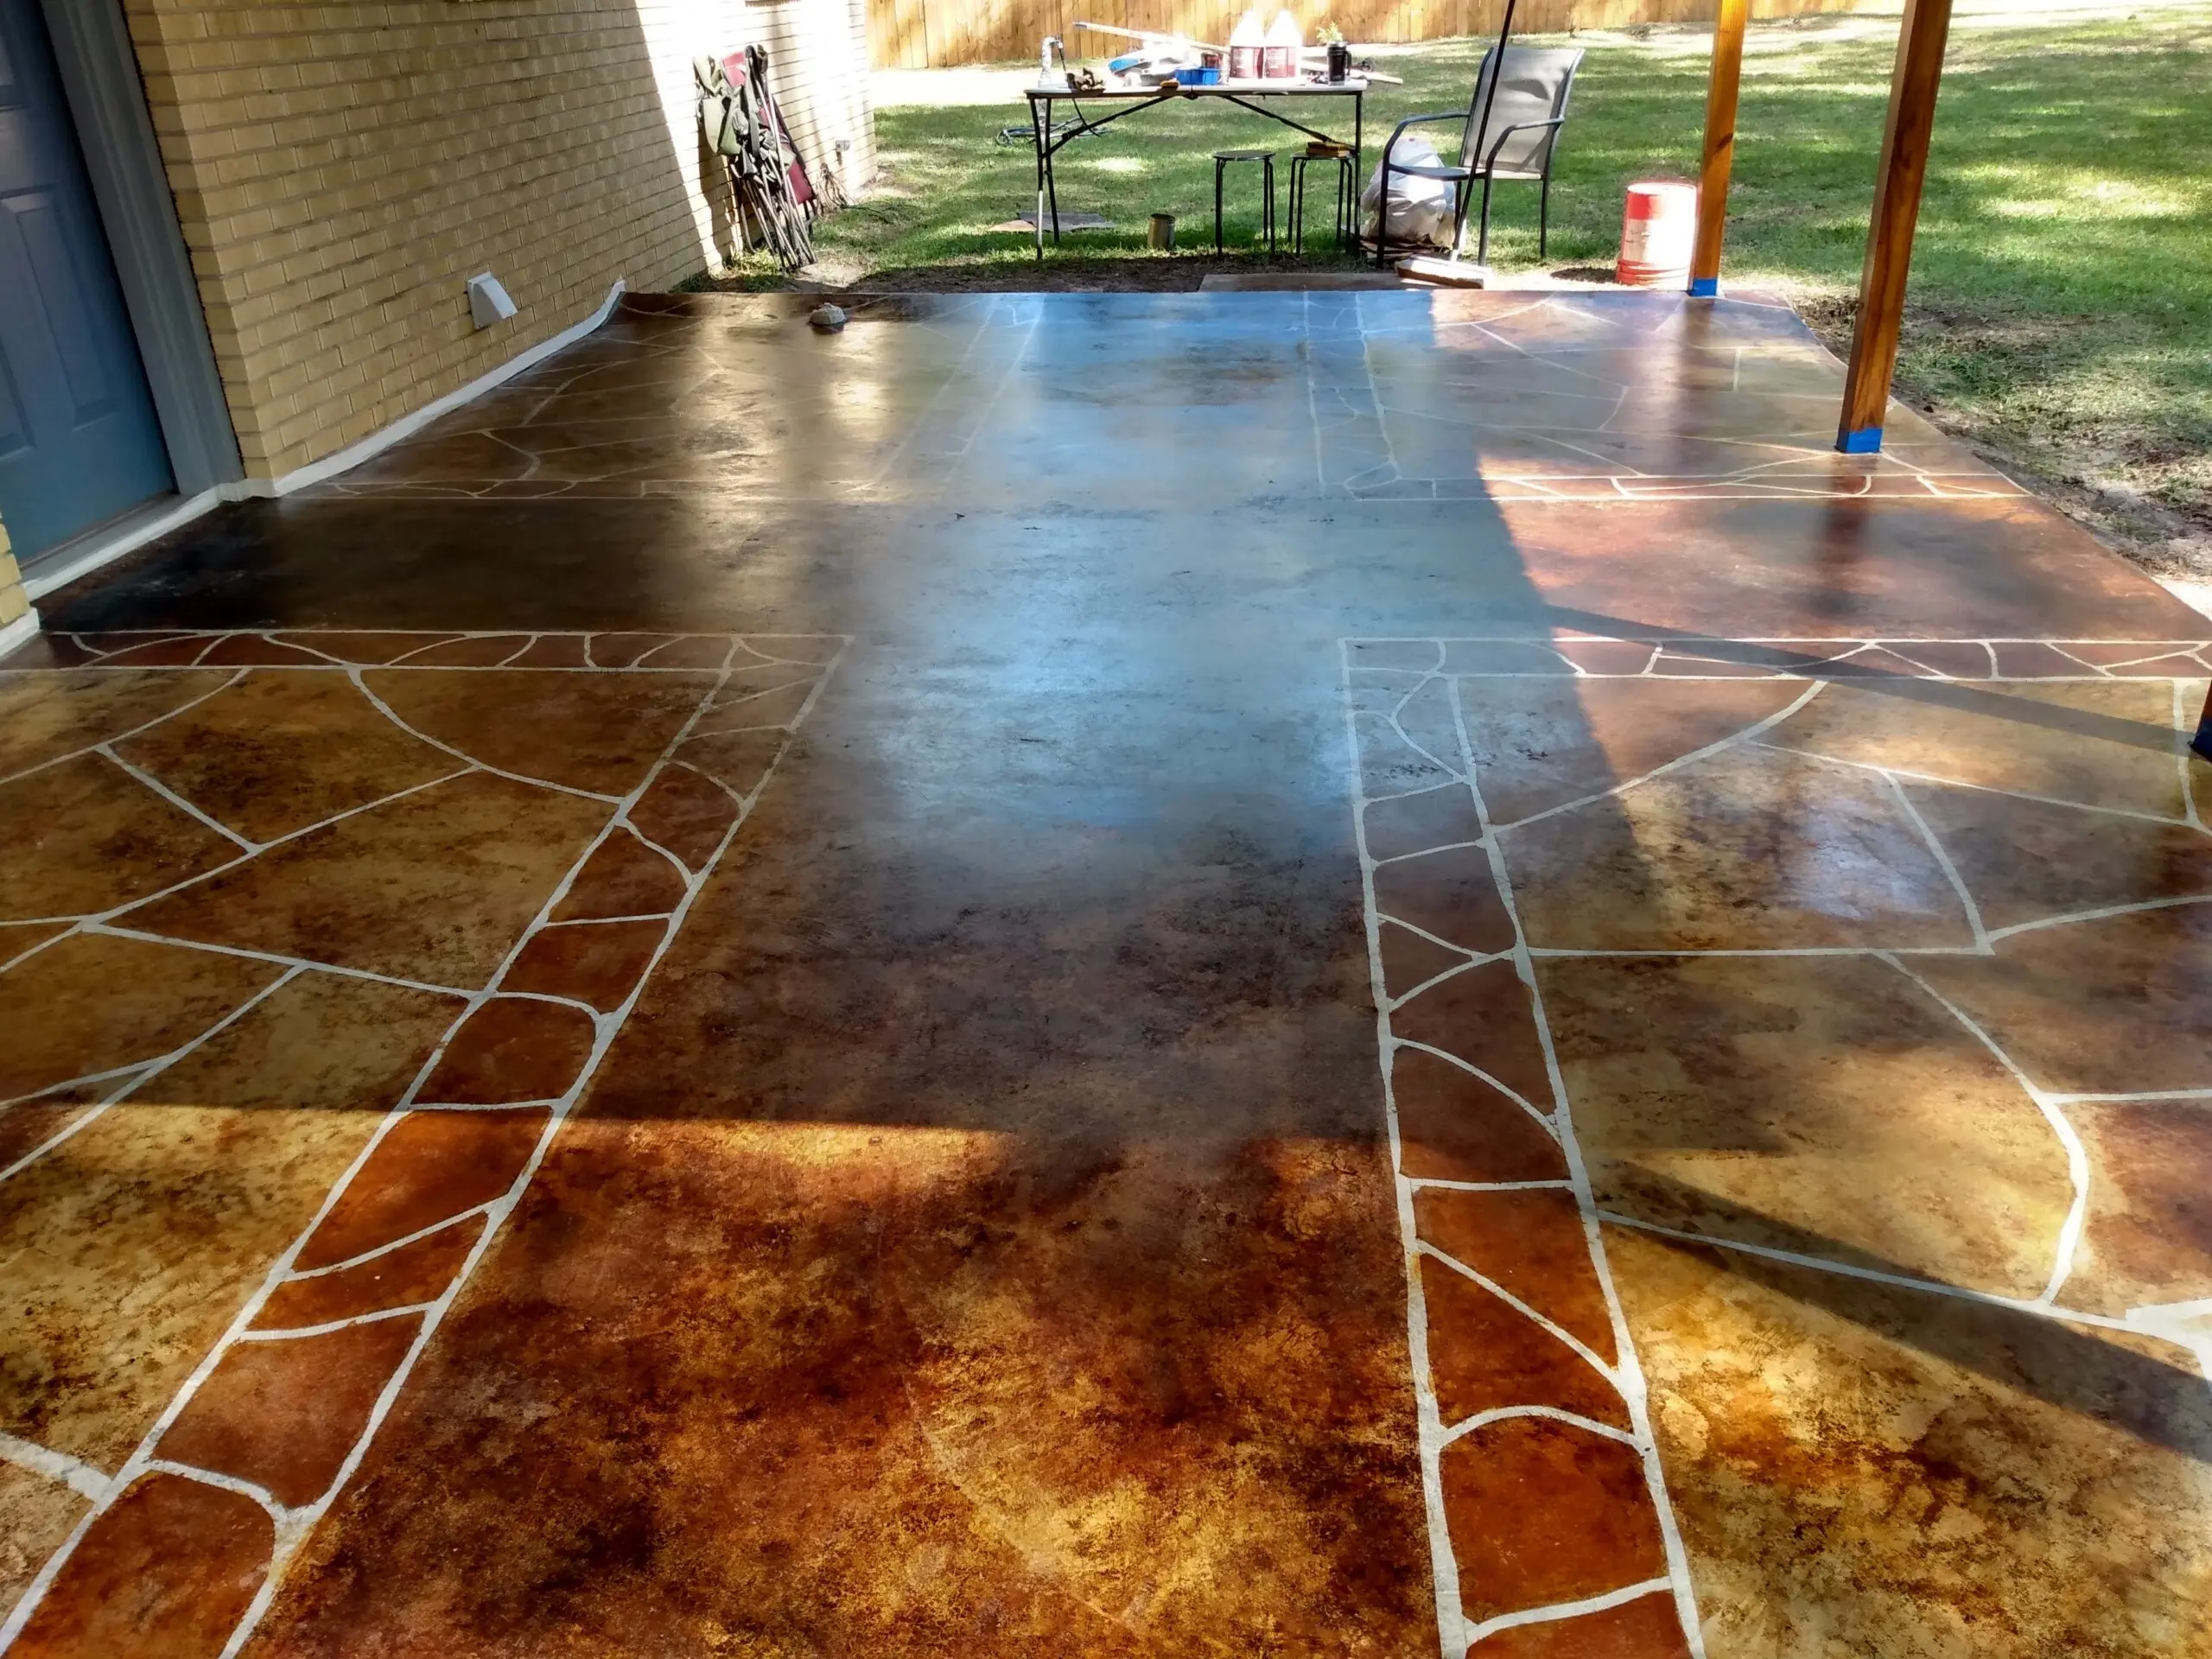 "Close-up image of the completed faux flagstone porch, showcasing the detailed color variations and patterns achieved with acid staining